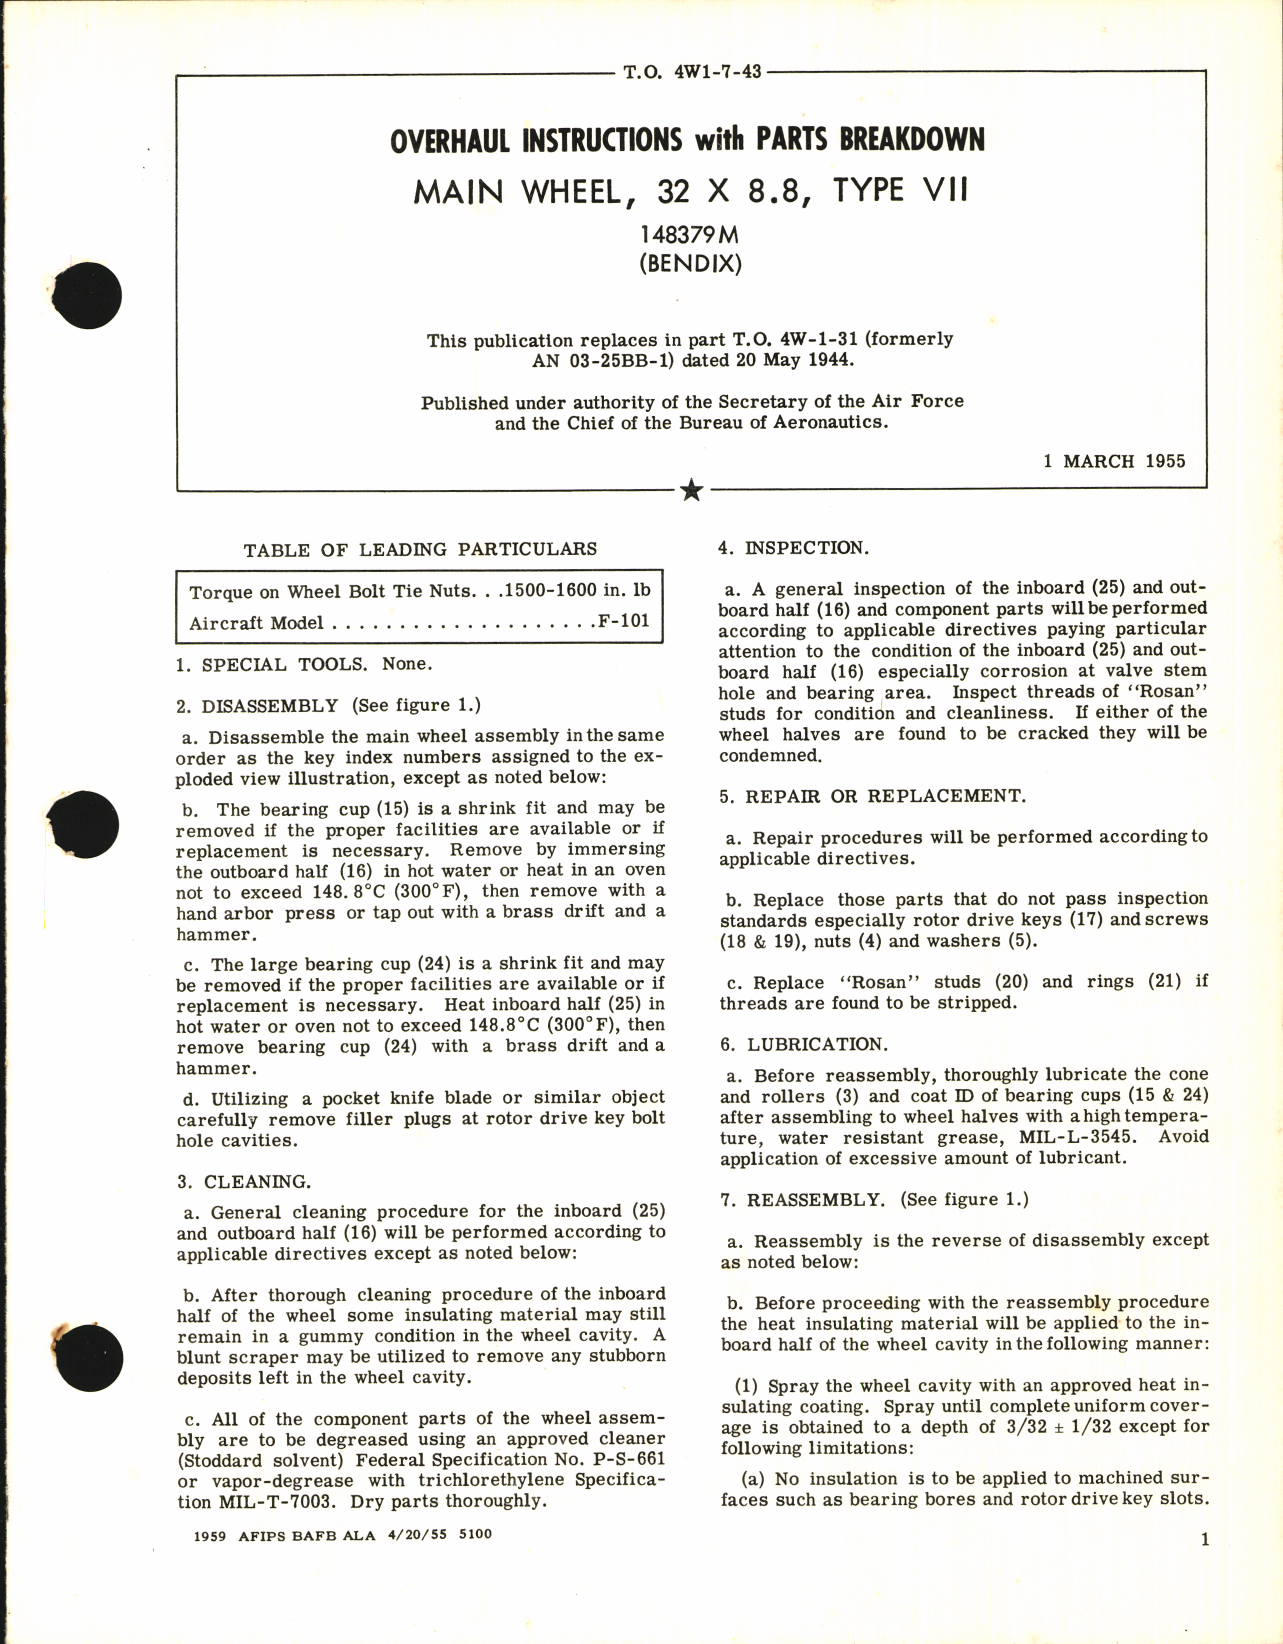 Sample page 1 from AirCorps Library document: Overhaul Instructions with Parts Breakdown for Main Wheel 32 x 8.8, Type VII